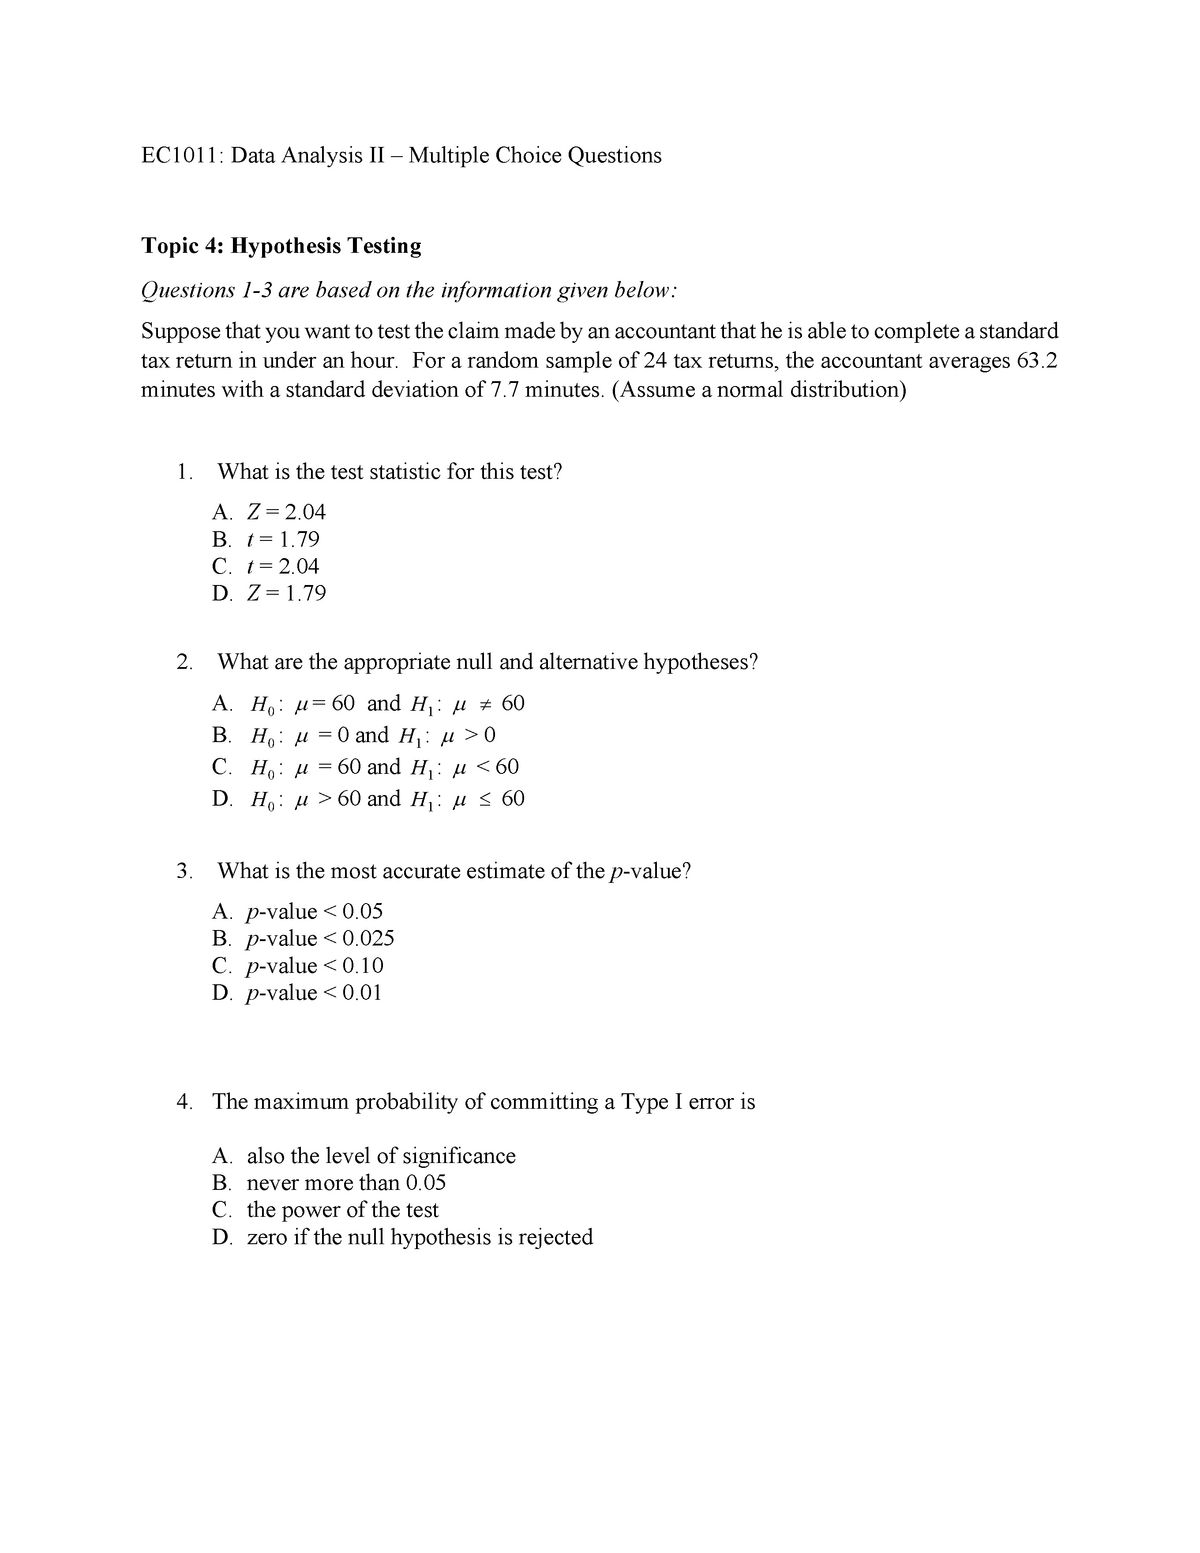 hypothesis mcq questions